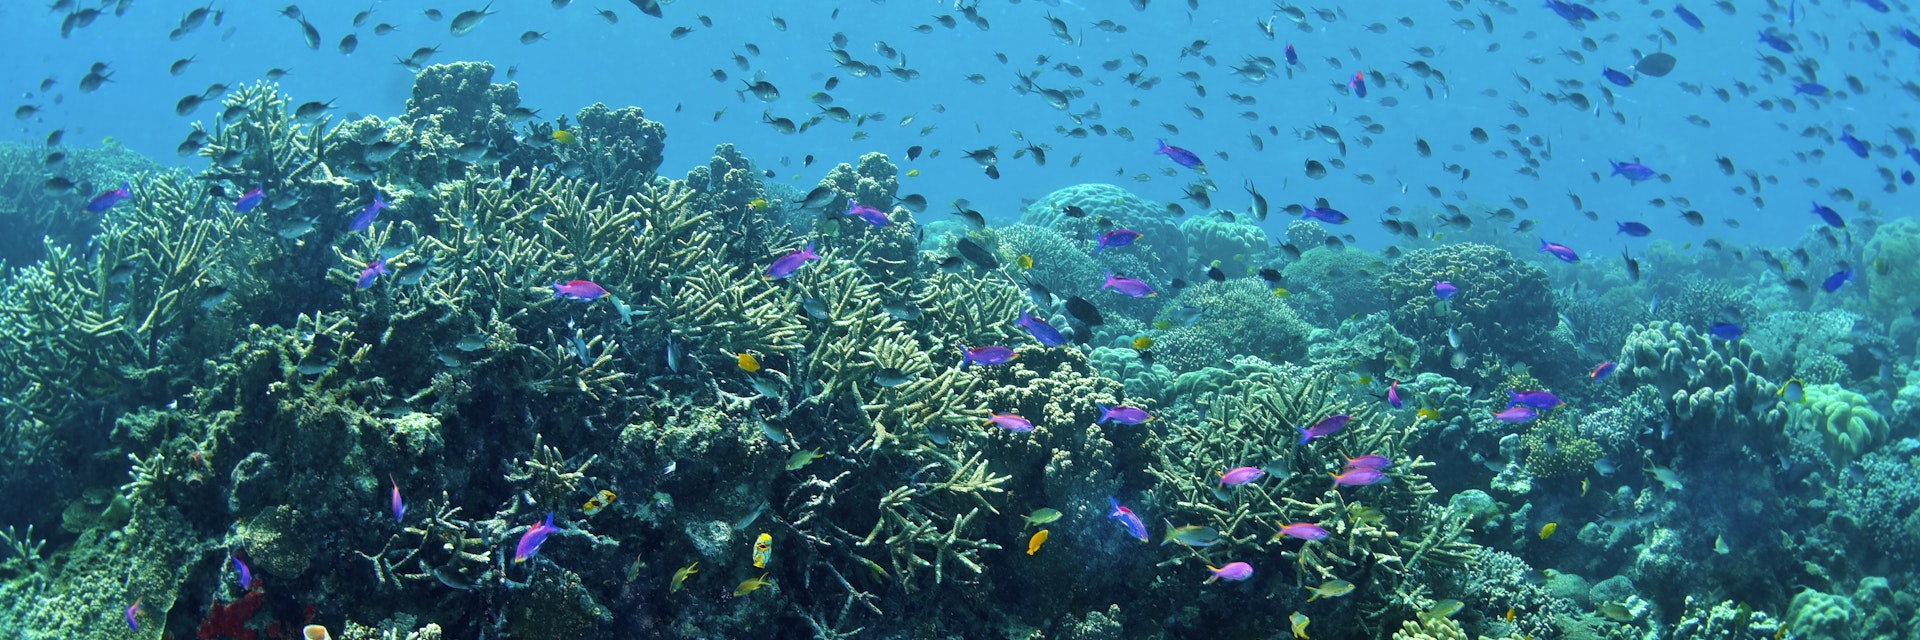 Clouds of reef fish over coral reef, Bunaken National Marine Park ,Sulawesi, Indonesia